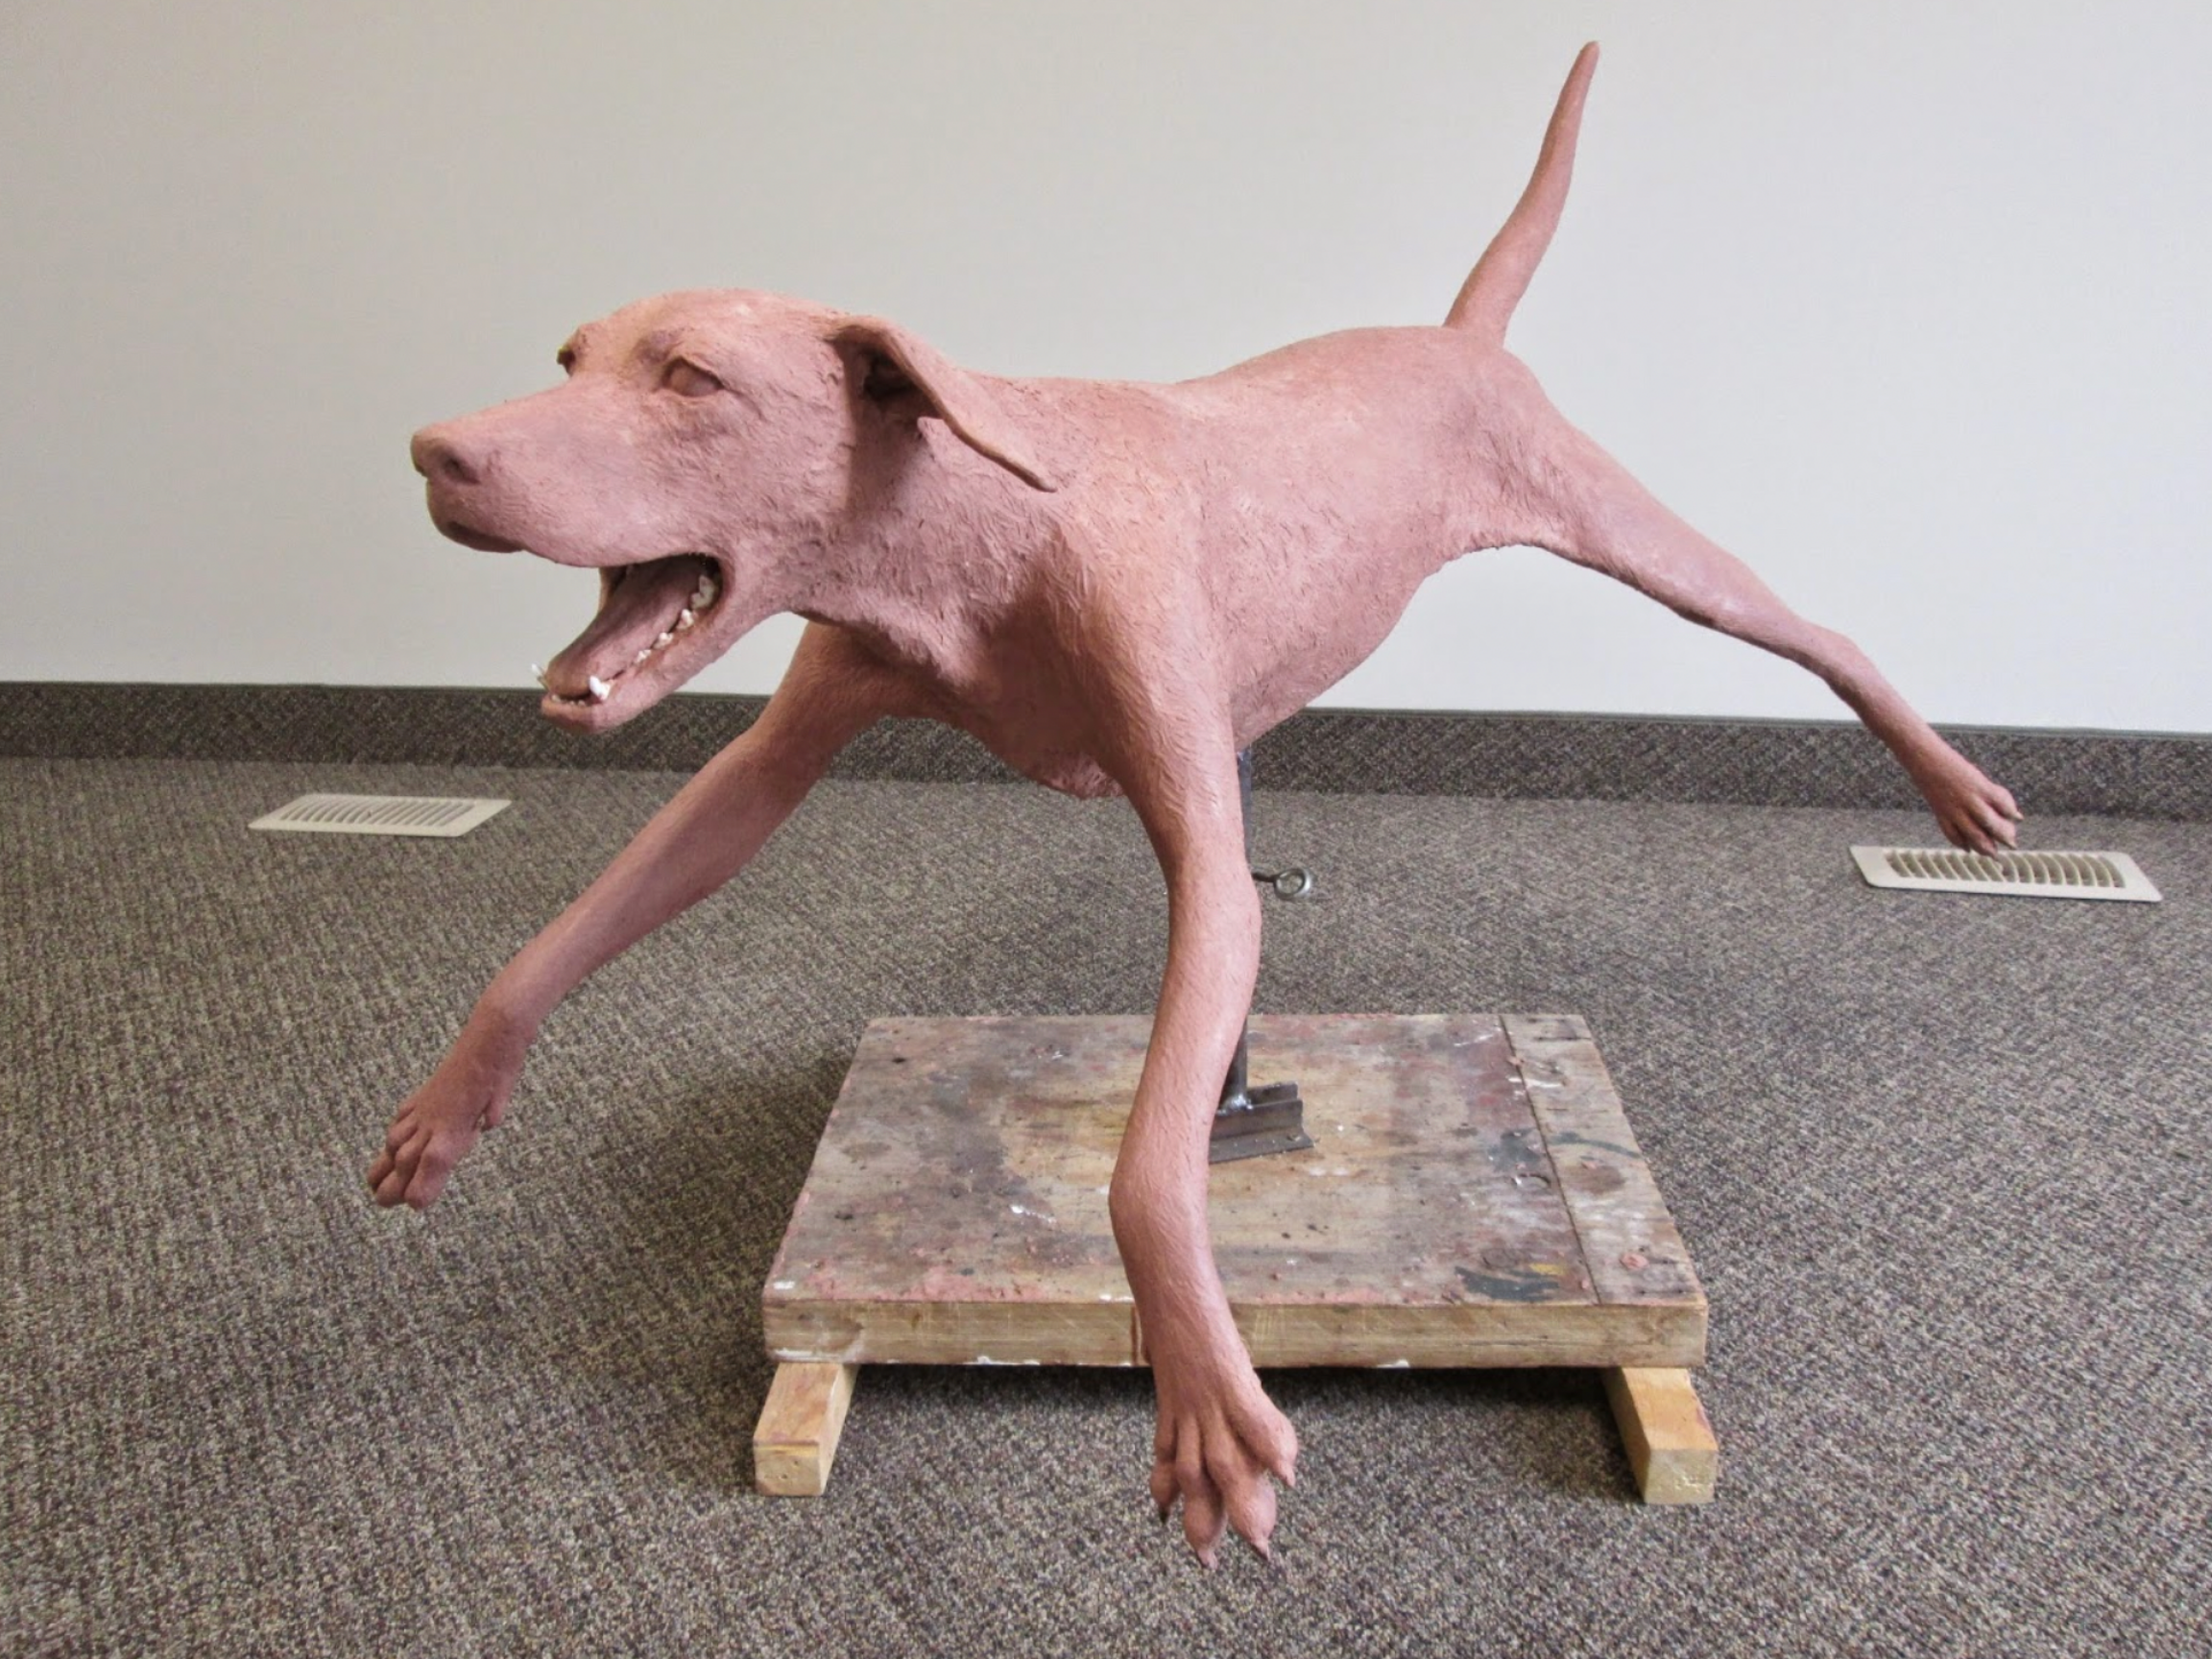  These next images show the original sculpture of our future canine simulator. &nbsp;It has been sculpted on an actual canine skeleton to ensure accuracy of the anatomy, positioning of joints, and allows us to cast the bones for a radiology limb mode